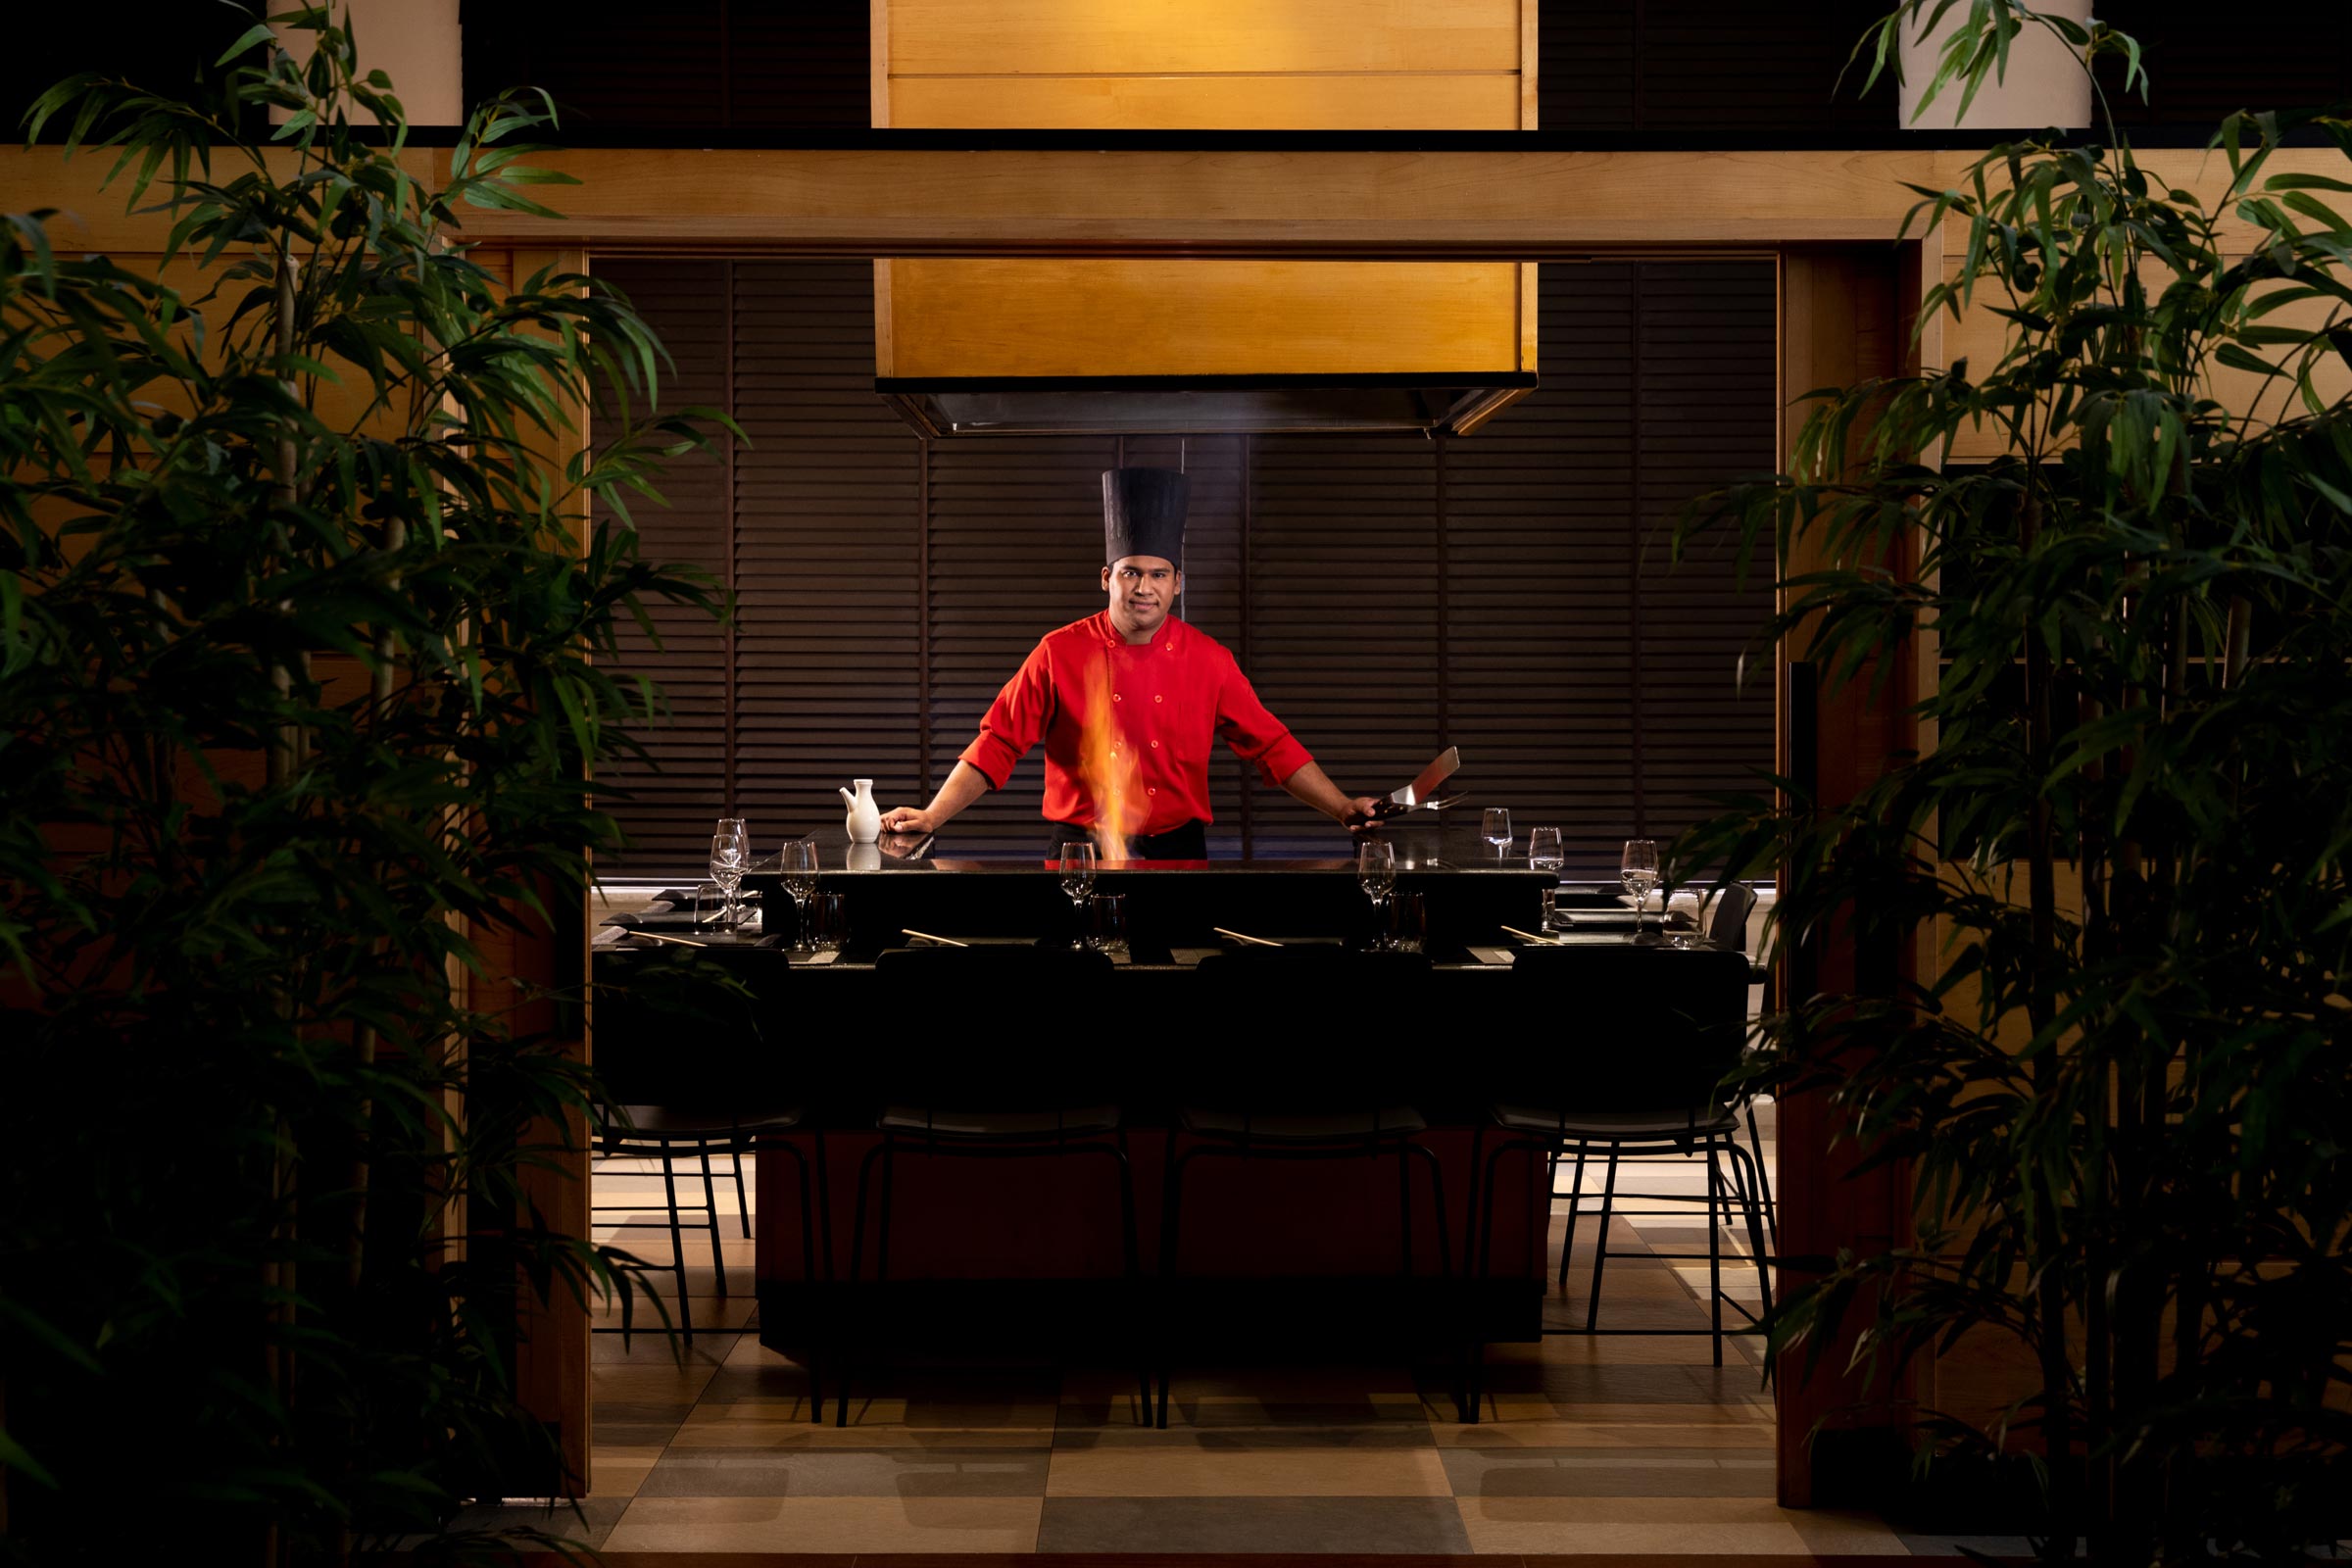 Enjoy the best flavors of the Far East in our Spice Restaurant at Excellence Riviera Cancun